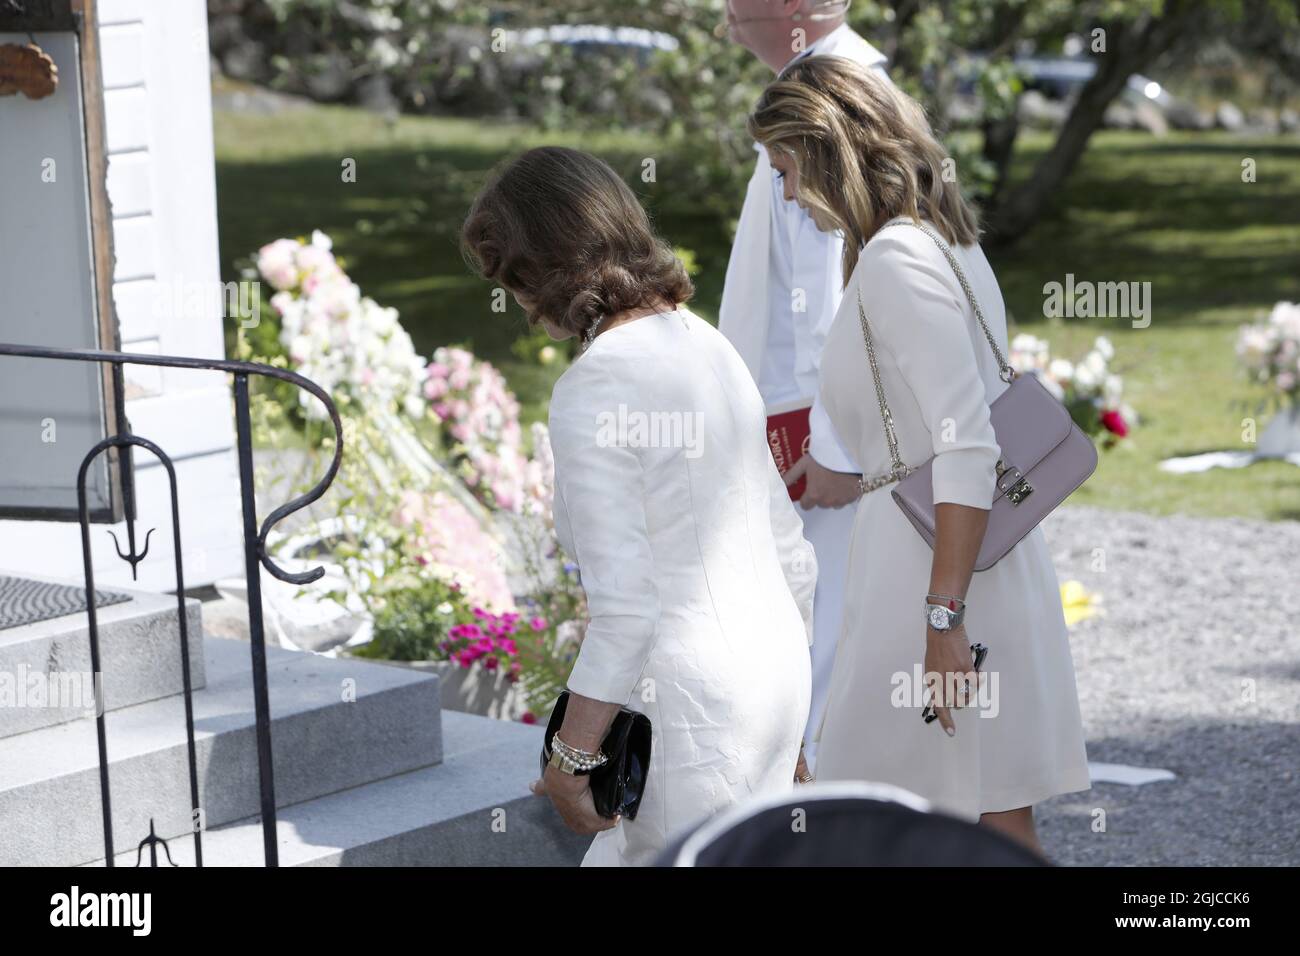 Princess Madeleine and Queen Silvia Funeral of Anki Wallenberg in Dalaro church, Stockholm, Sweden 19 July 2019 Anki Wallenberg died in a sailing accident on the lake Geneva. She resided in London and was a close friend to the Swedish Royal Family. (c) Patrik Ã–sterberg / TT / kod 2857  Stock Photo